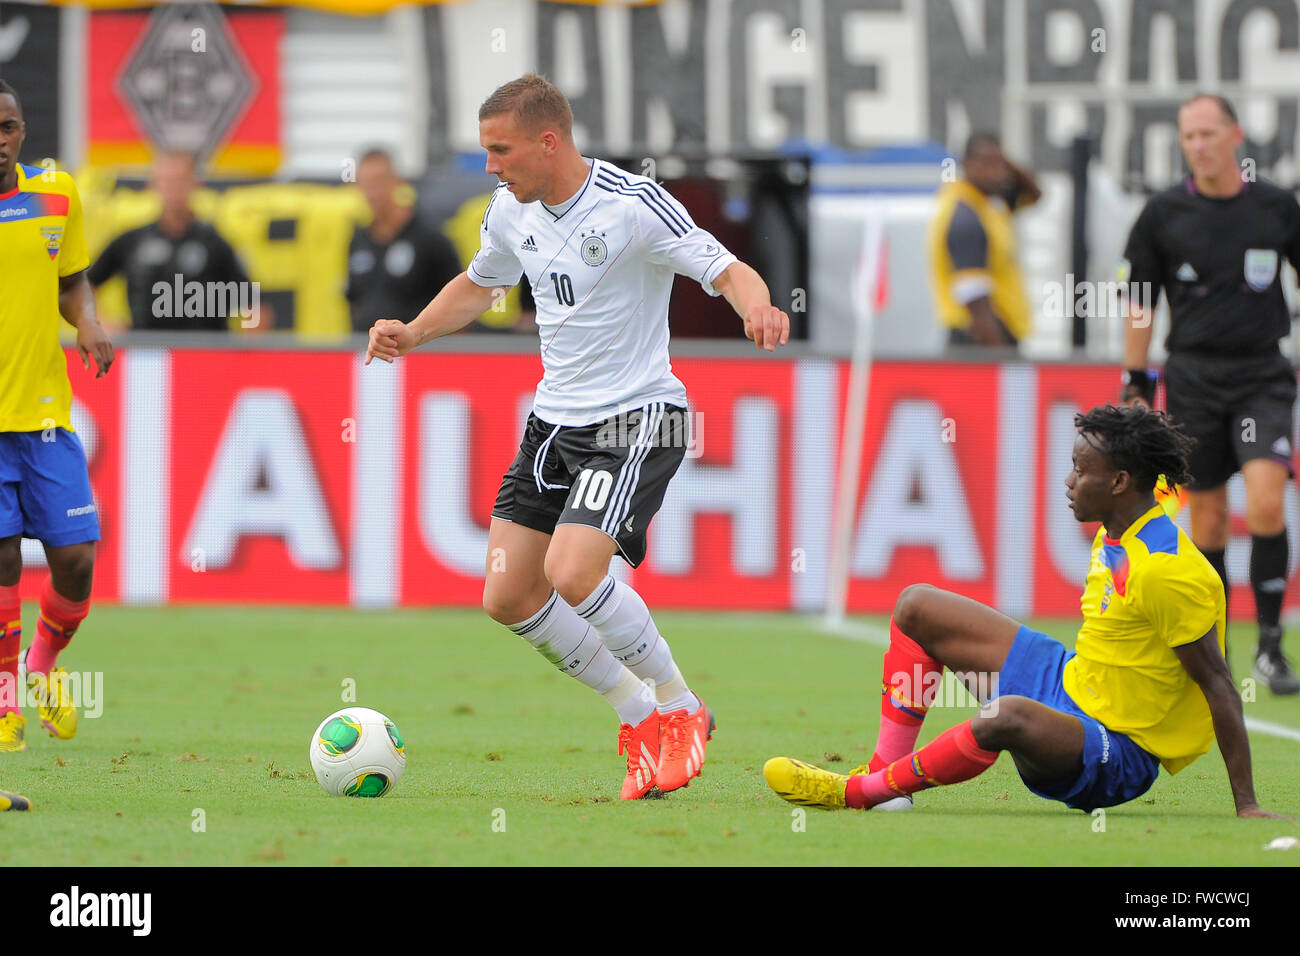 Boca Raton, FL, USA. 29th May, 2013. Germany midfielder Lukas Podolski (10) and Ecuador defender Juan Carlos Paredes (4) fight for the ball during an international friendly at FAU Stadium in Boca Raton, Florida on May 29, 2013. Germany won 4-2.ZUMA PRESS/Scott A. Miller © Scott A. Miller/ZUMA Wire/Alamy Live News Stock Photo